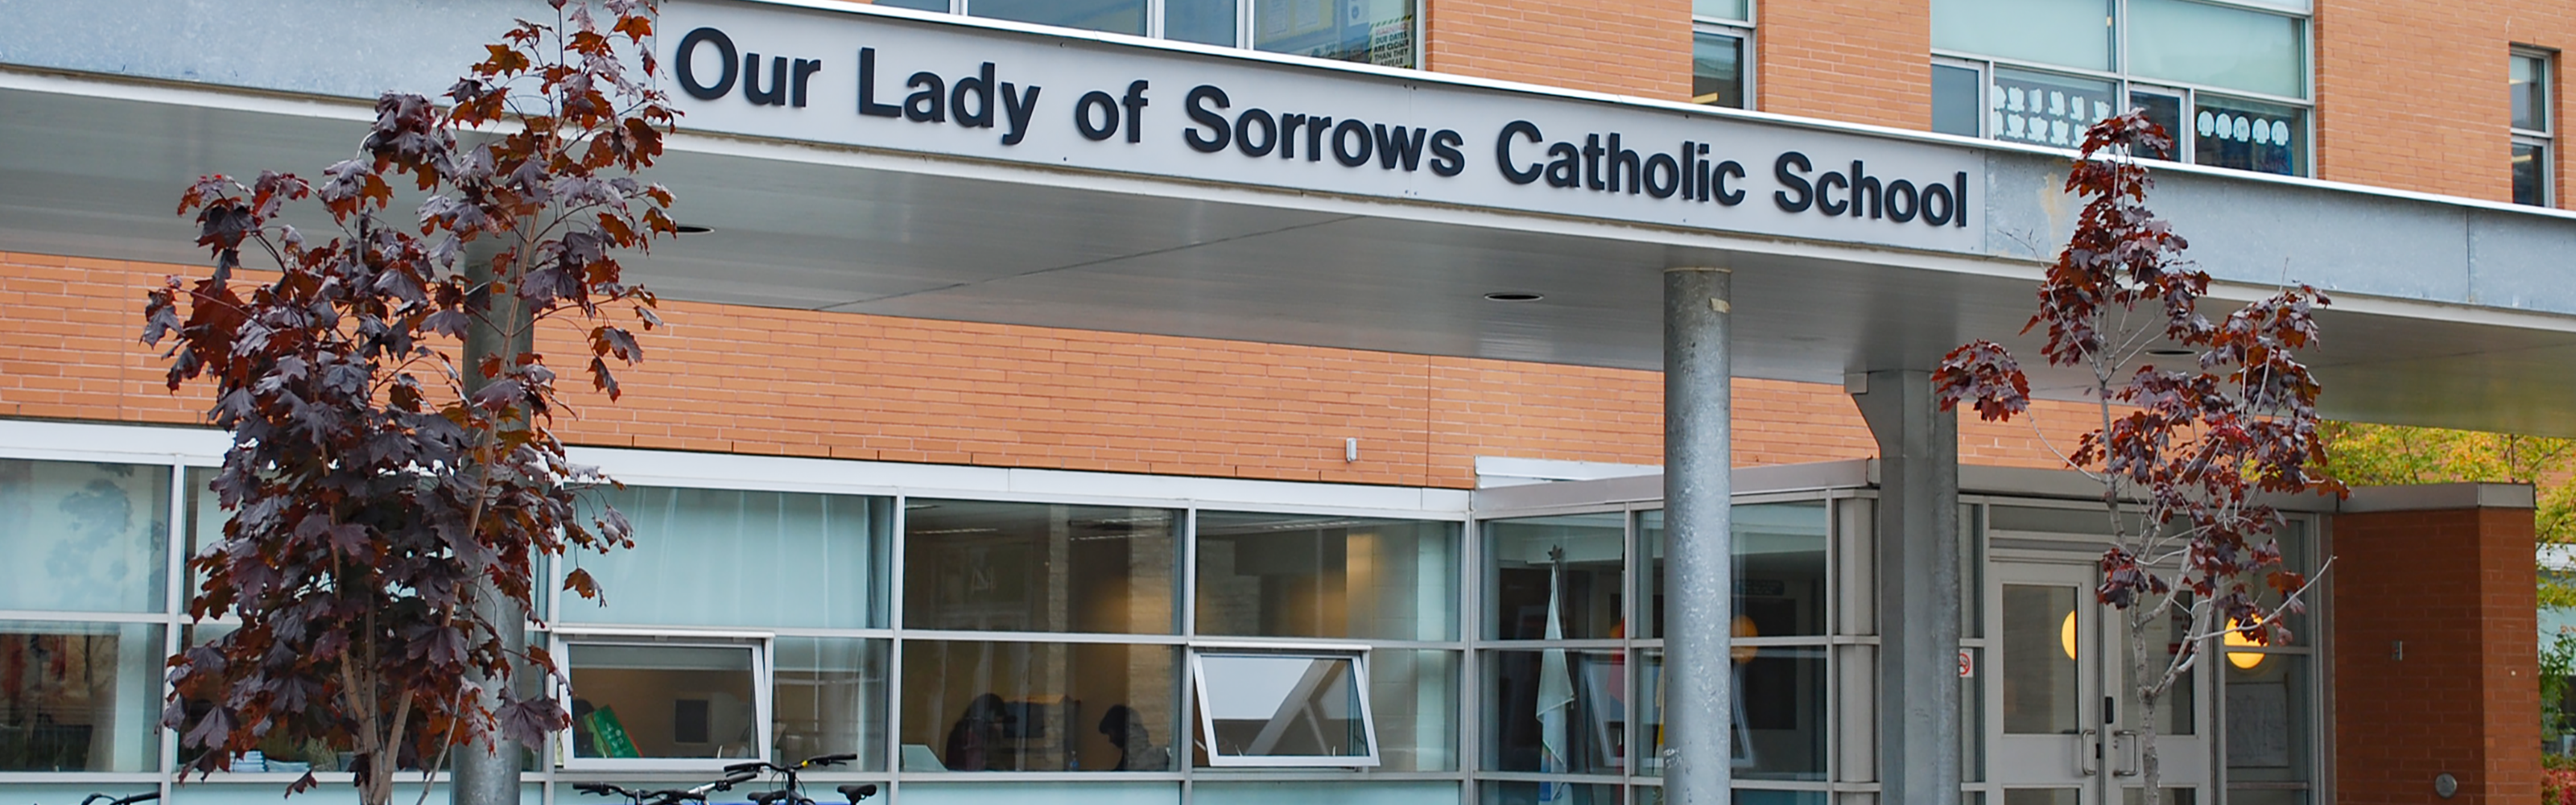 The front of the Our Lady of Sorrows Catholic School building.